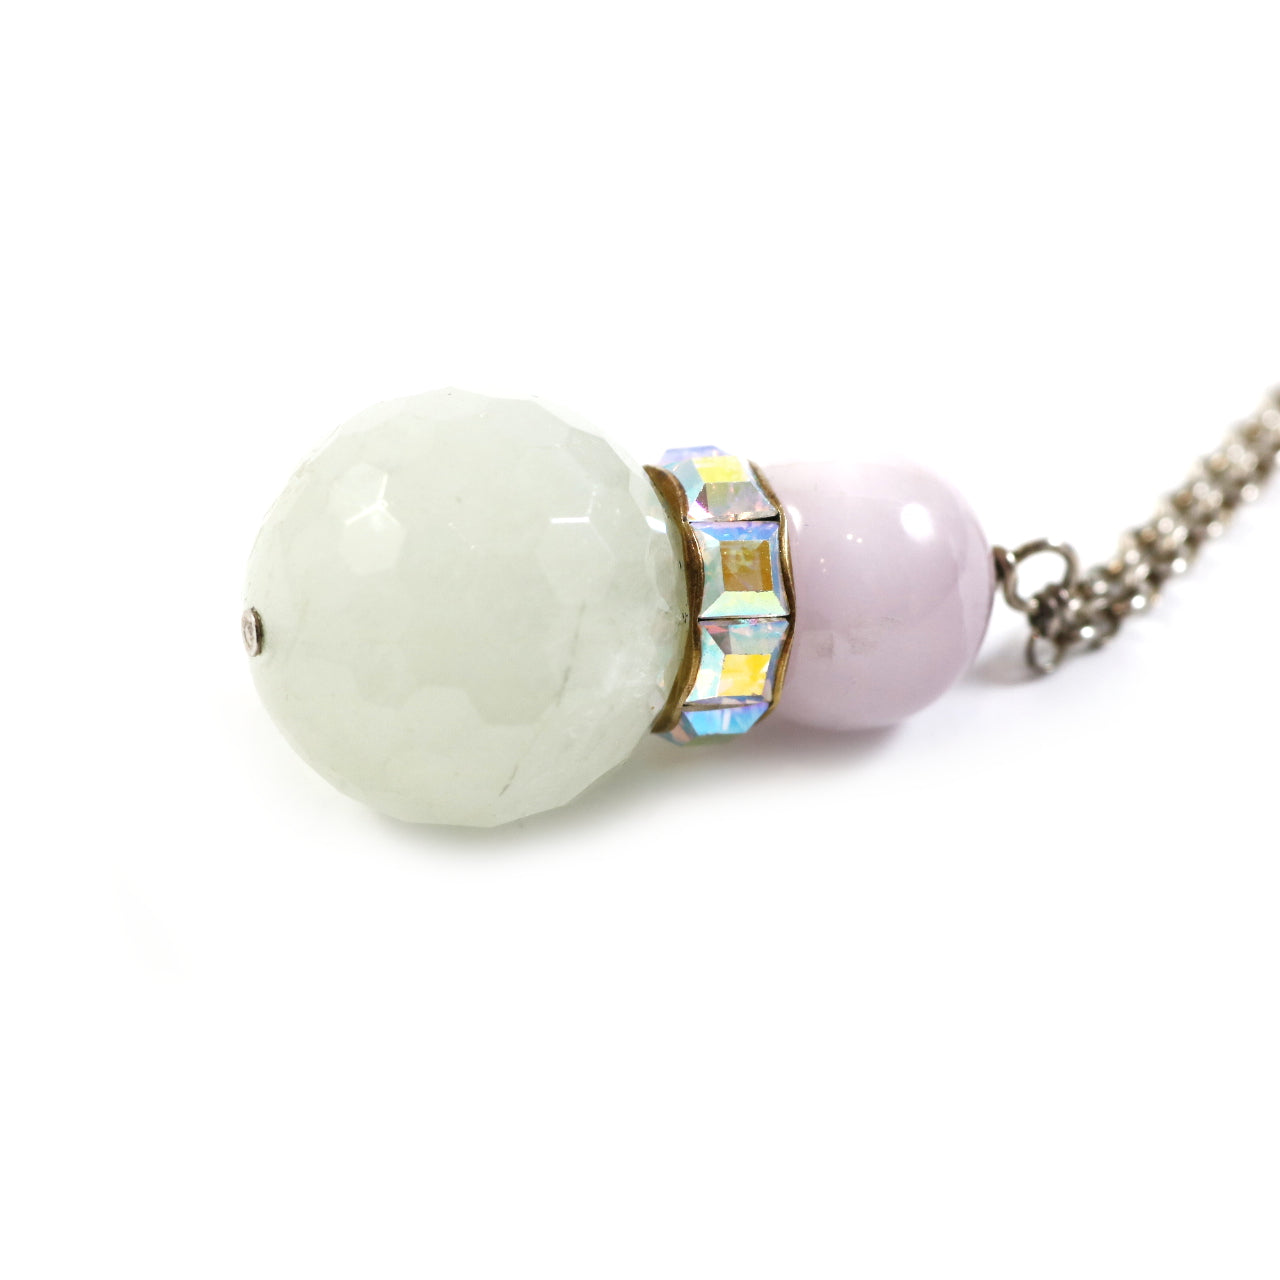 White and Pink Stone Necklace